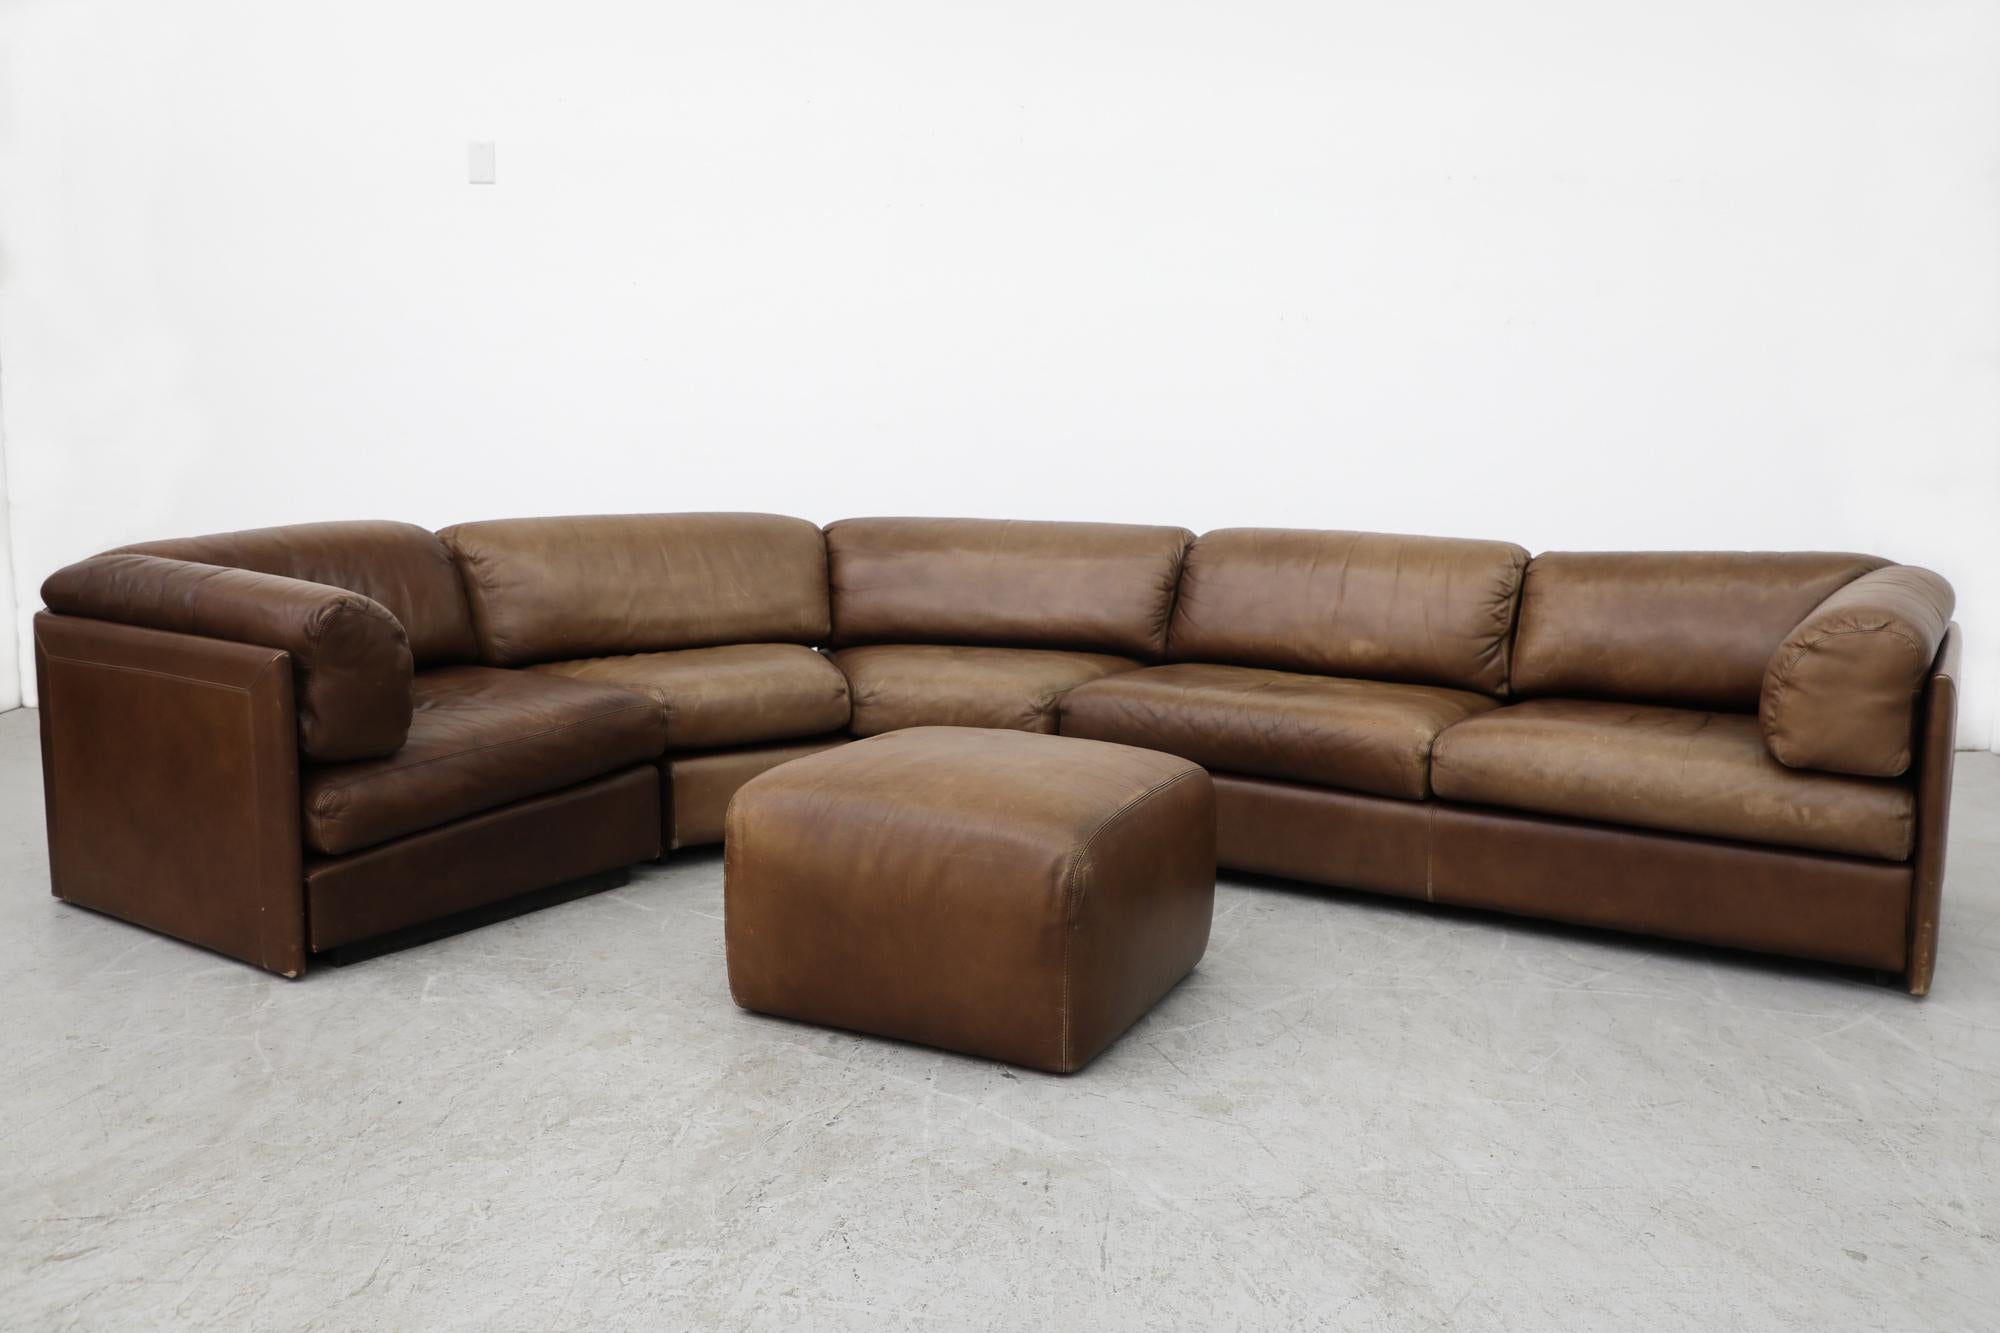 Midcentury Leolux thick natural brown leather curved sectional sofa with matching ottoman. In original condition with visible wear and fading to the leather. This set has 3 single pieces; a single seat end/corner, an angled 2 seater, and a straight